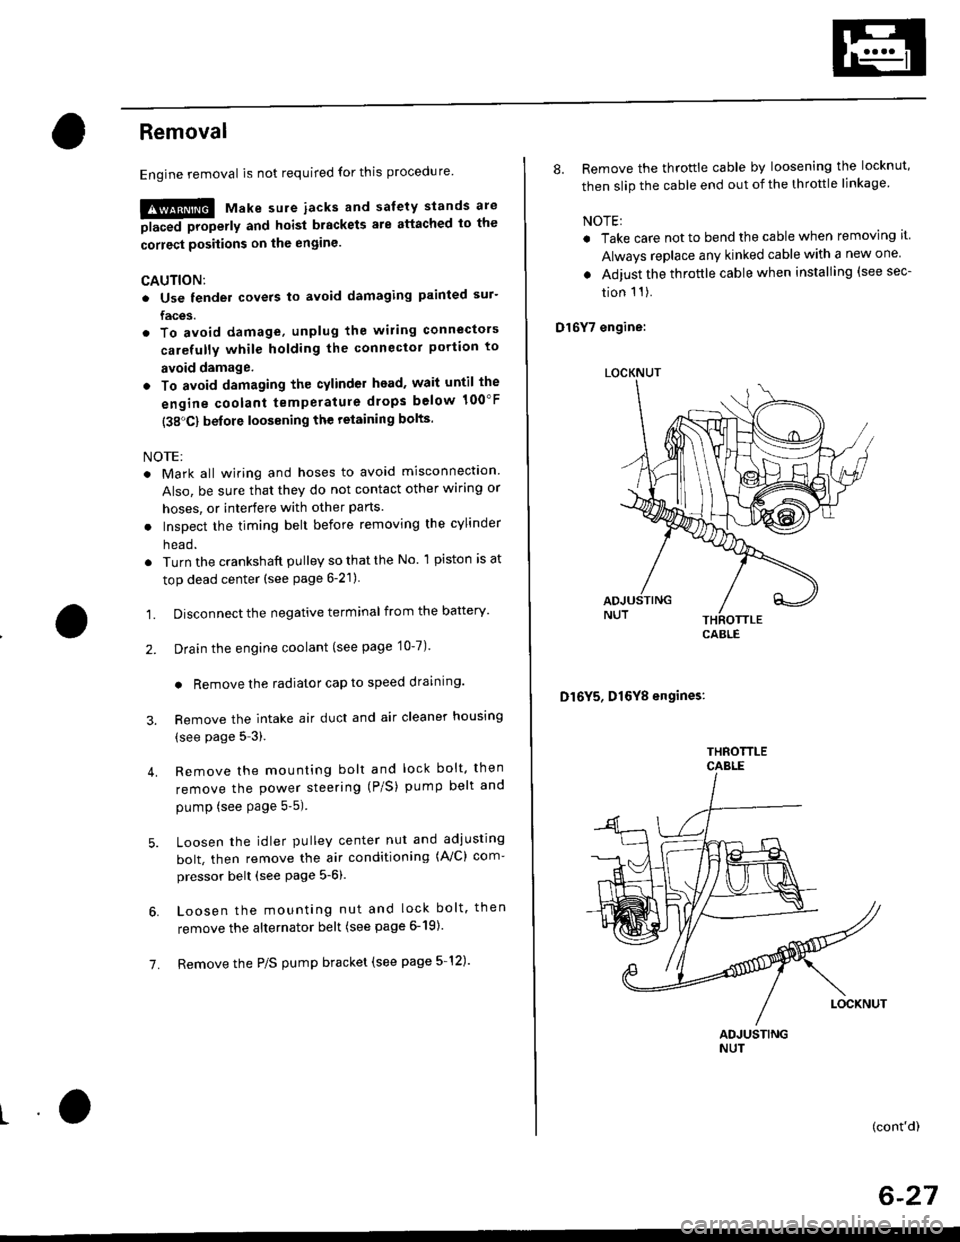 HONDA CIVIC 1996 6.G Workshop Manual Removal
Engine removal is not required for this procedure
!!!s@ Make sure iacks and salety stands are
f ta"eata"ea propetty and hoist brackets are attached to the
correct positions on the engine.
CAUT